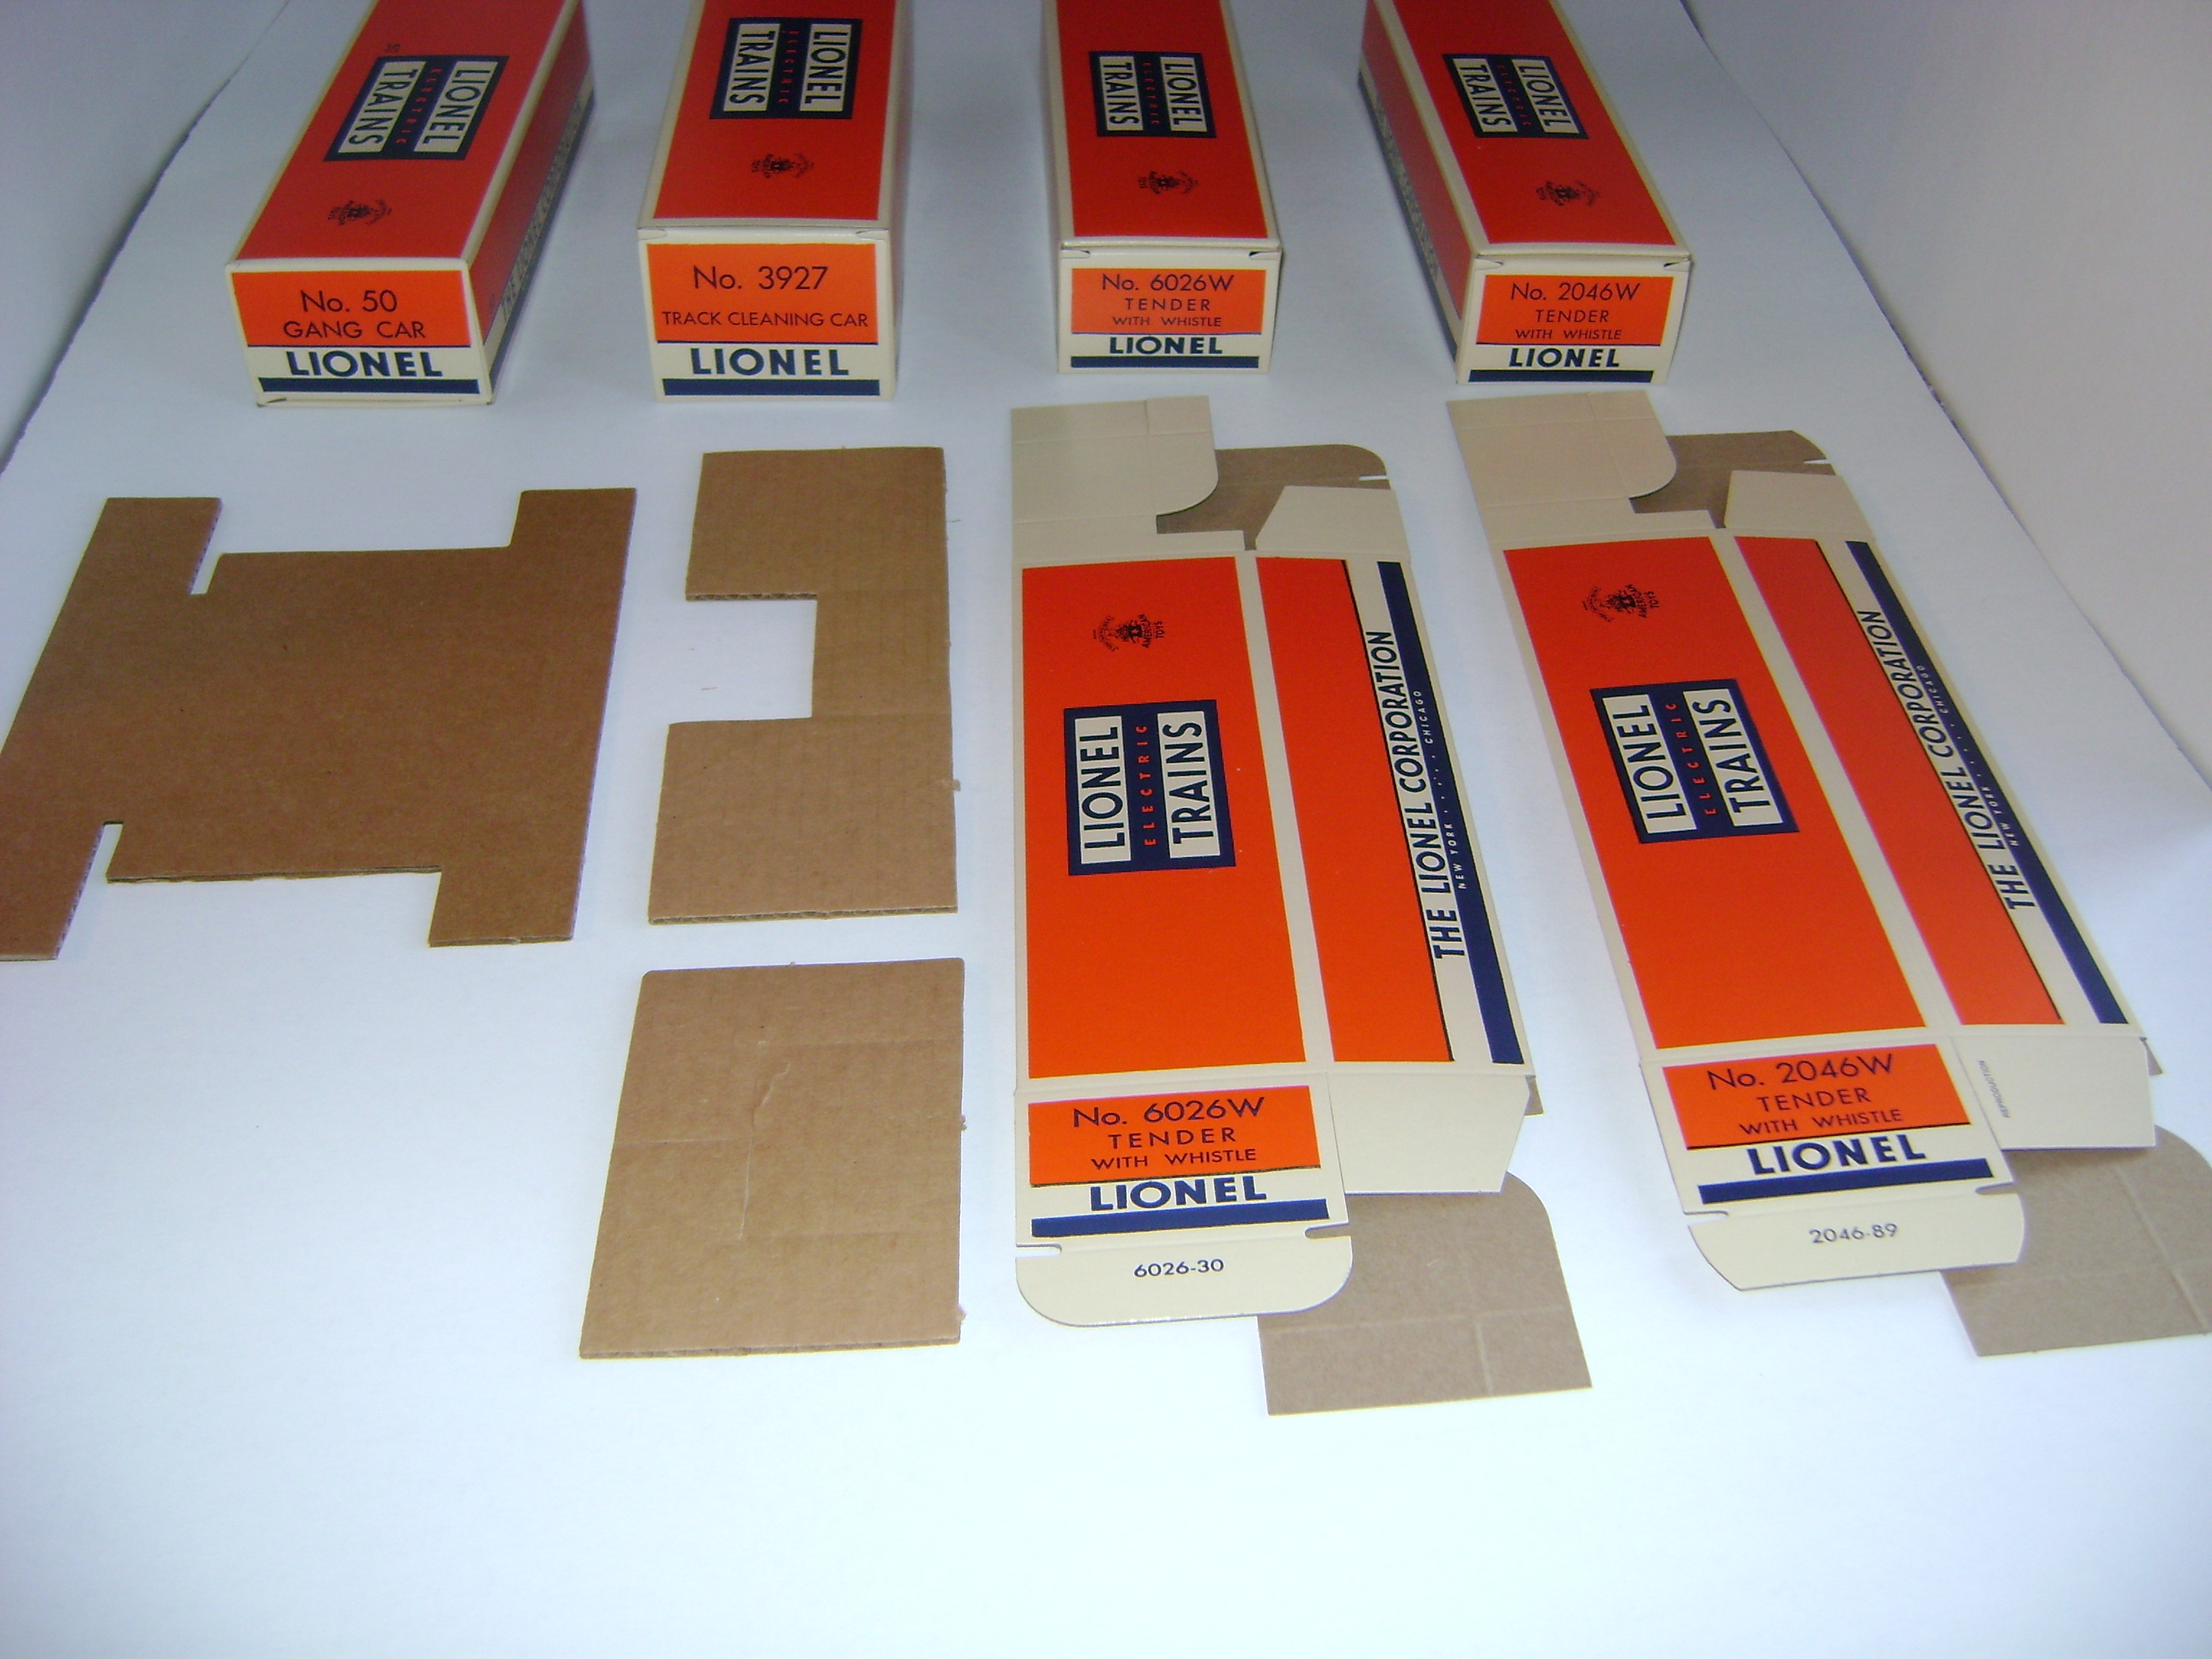 lionel train replacement boxes